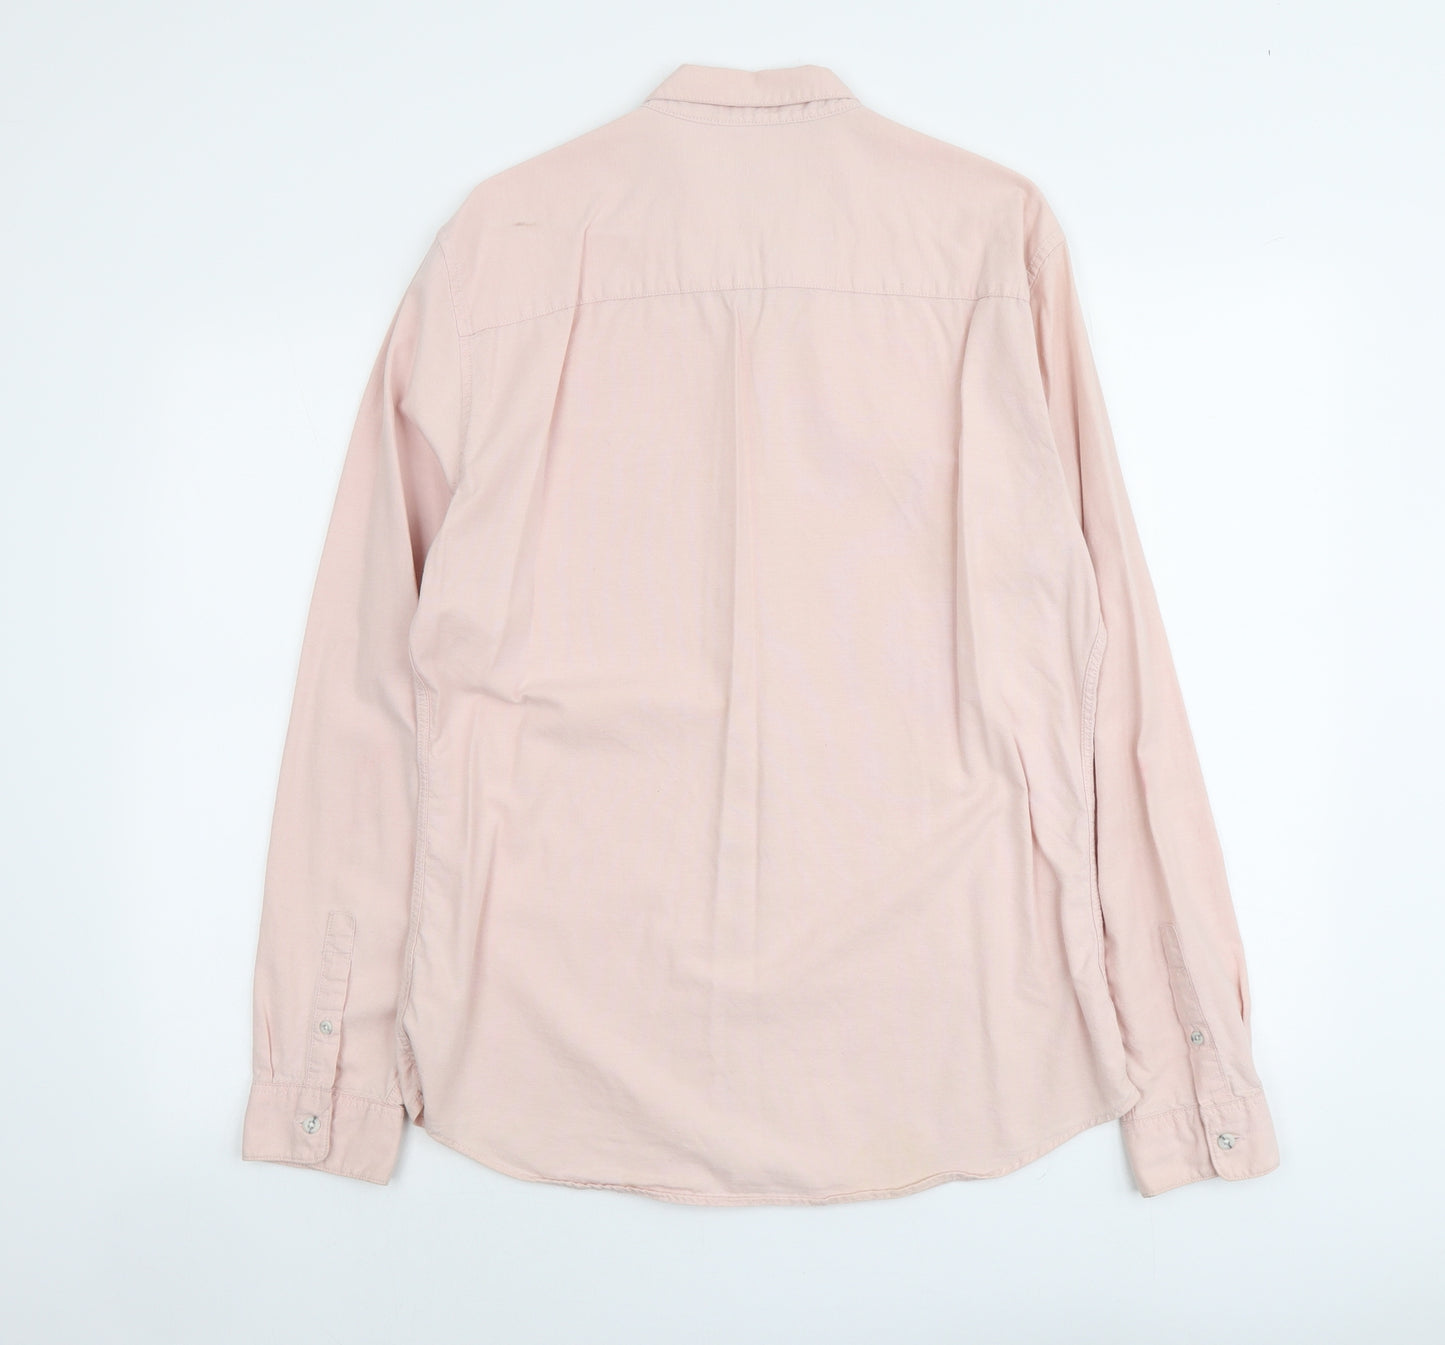 Topman Mens Pink Cotton Button-Up Size XL Collared Button